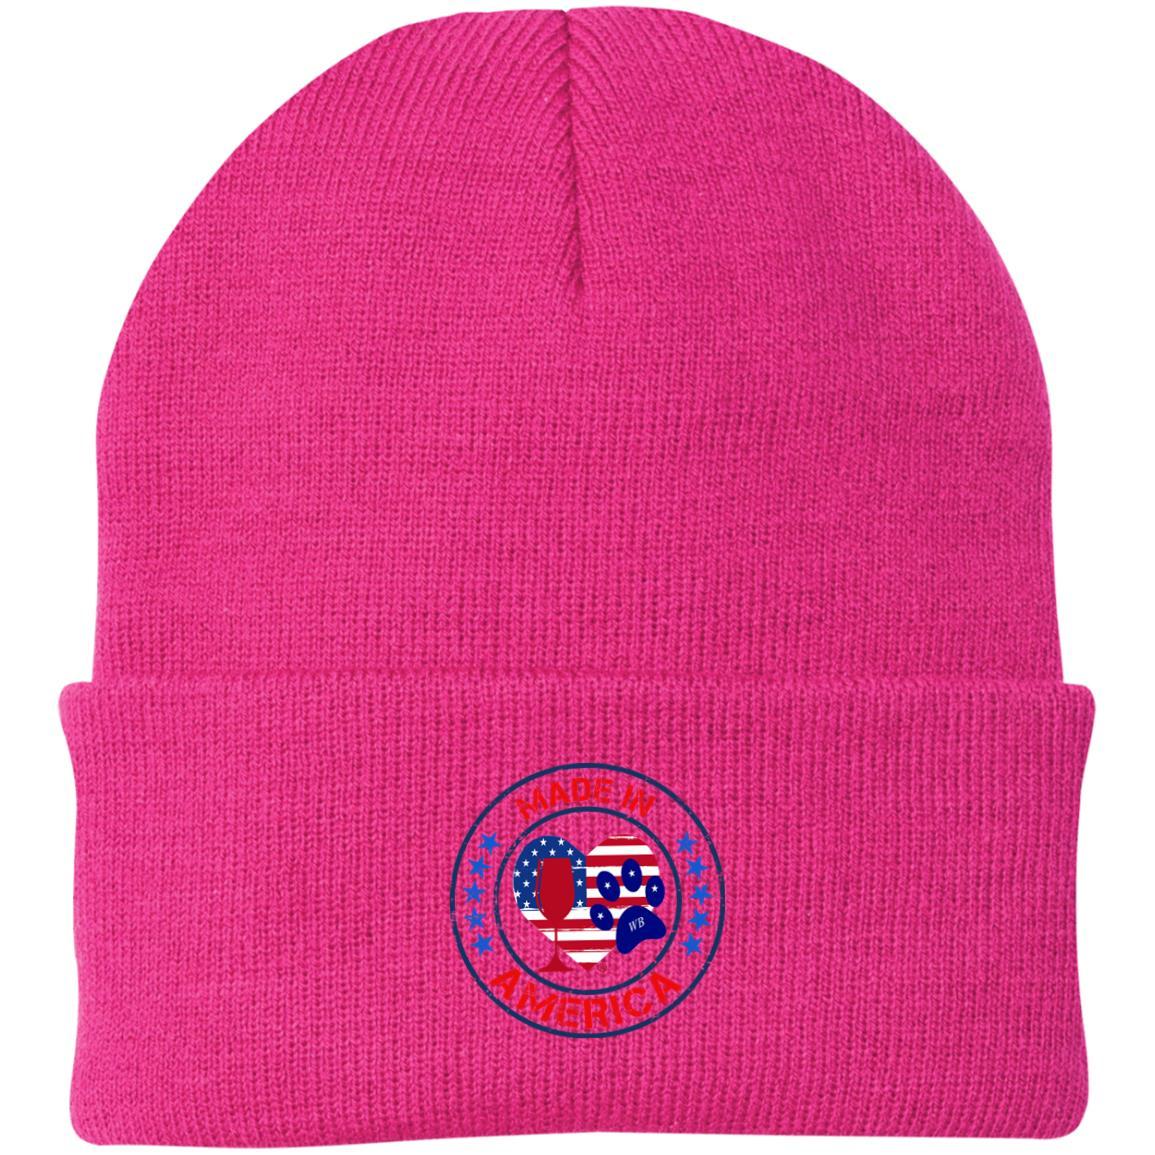 Hats Neon Pink / One Size Winey Bitches Co "Made In America" Embroidered Knit Cap WineyBitchesCo